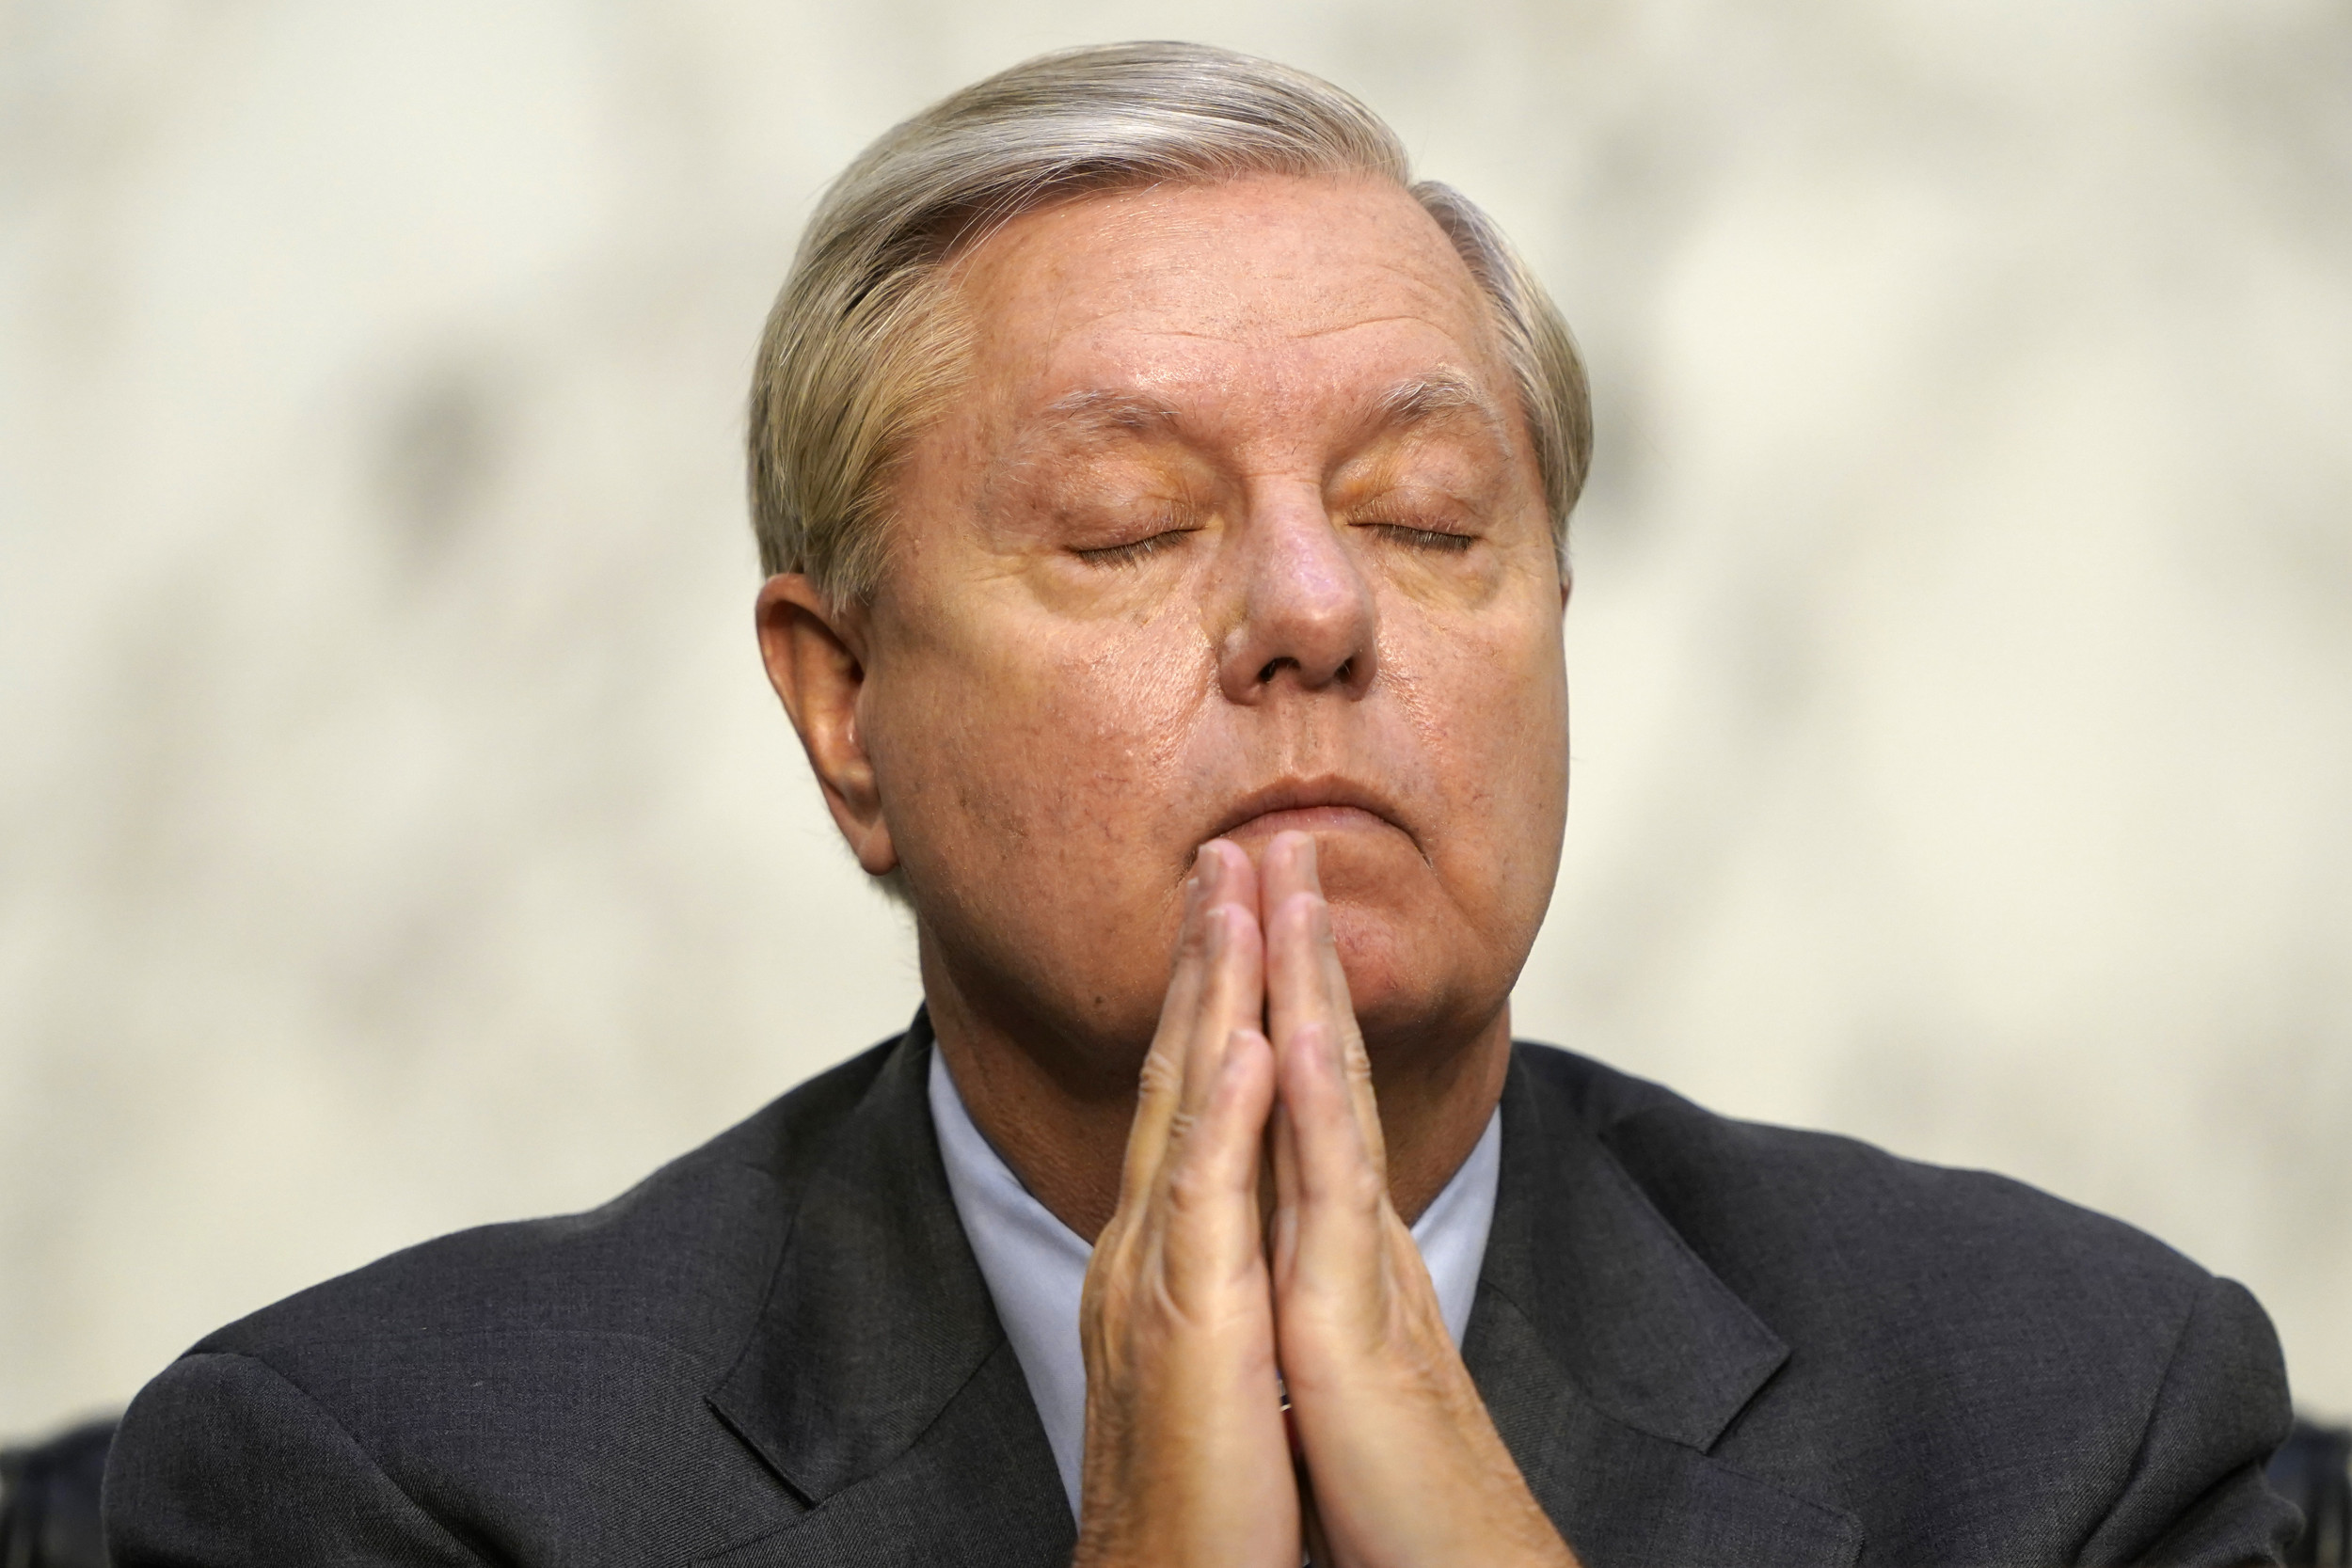 Lindsey Graham predicts Donald Trump will lead the Republican Party in the coming months